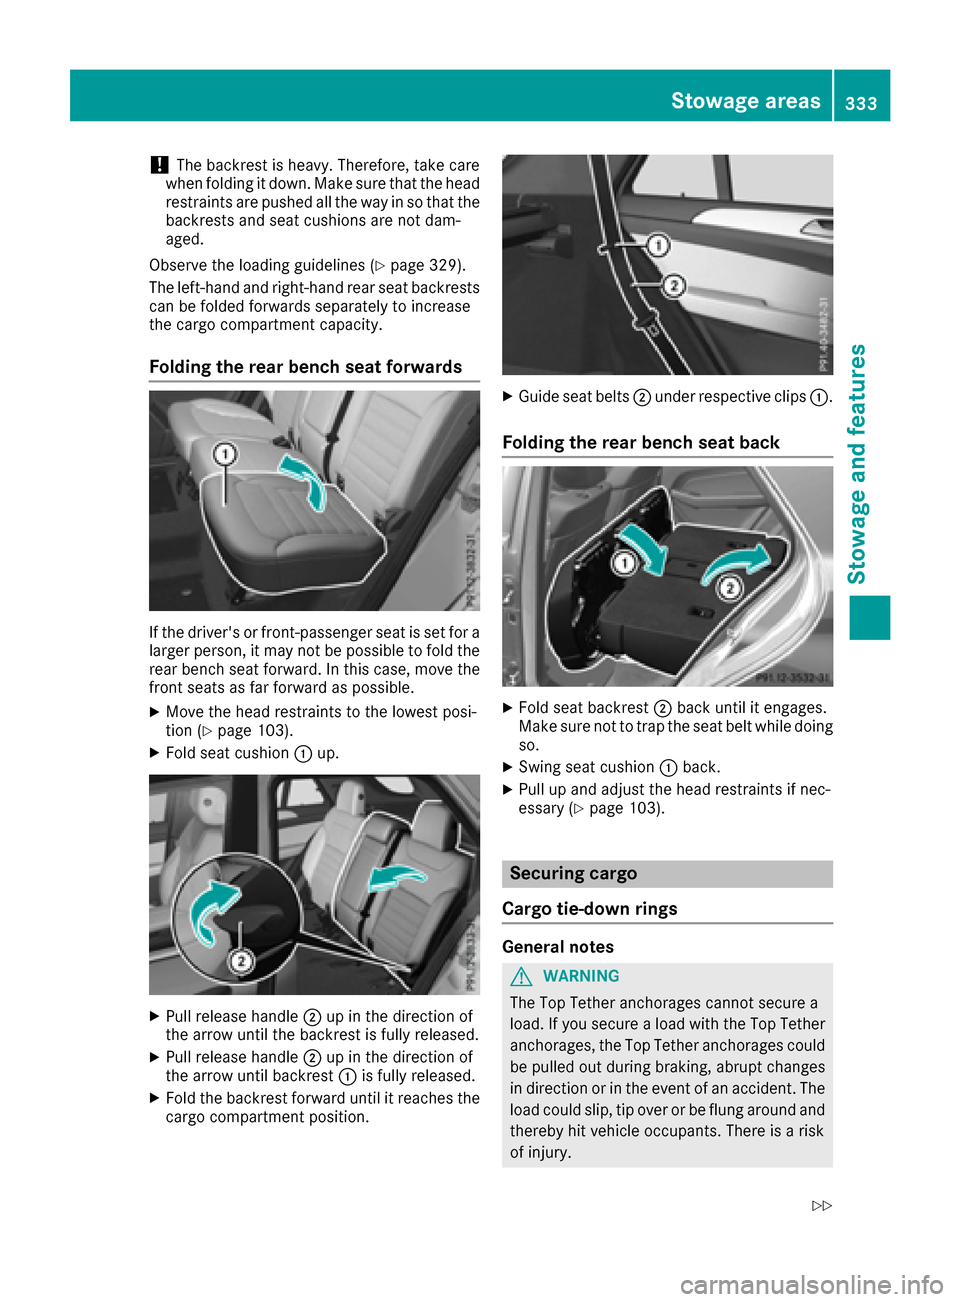 MERCEDES-BENZ GLE-Class 2016 W218 Owners Guide !The backrest is heavy. Therefore, take care
when folding it down. Make sure that the head
restraints are pushed all the way in so that the backrests and seat cushions are not dam-
aged.
Observe the l